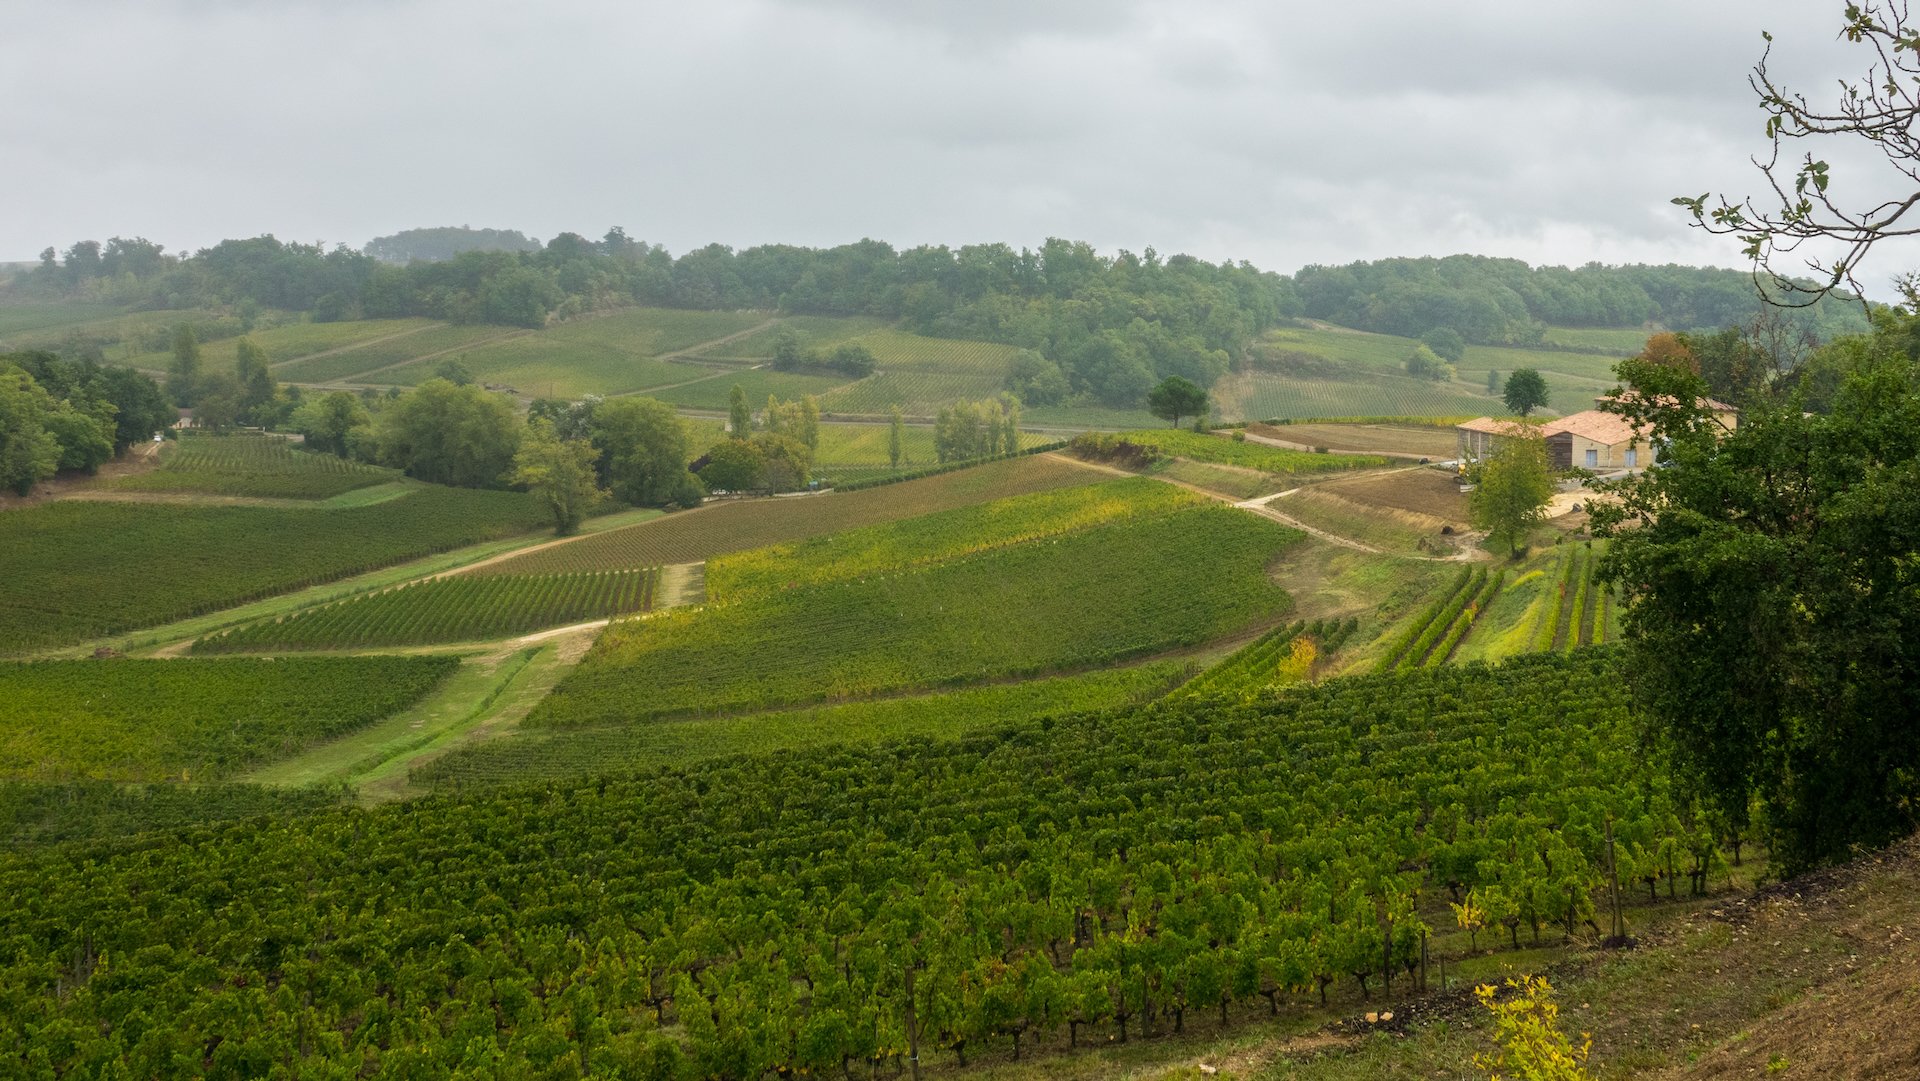  You can see the mix of old, mature vineyards with new plantings, securing the future of the winery.  